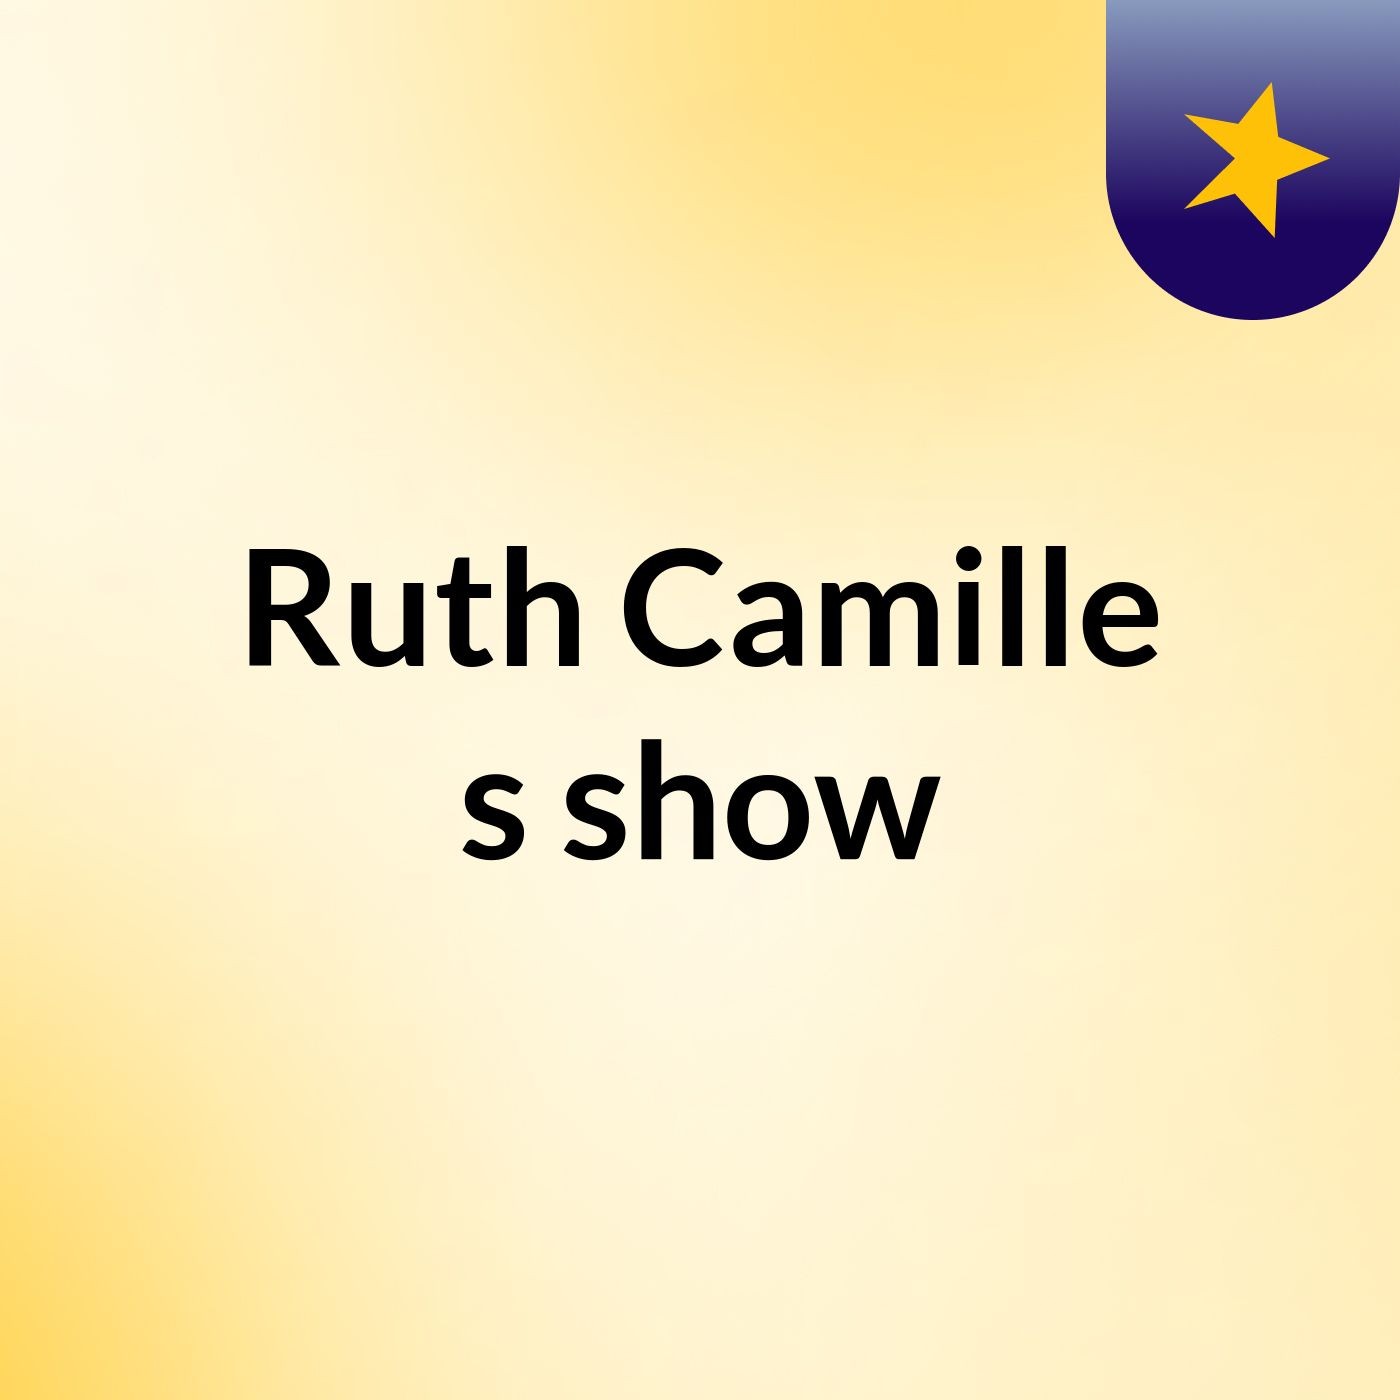 Ruth Camille's show